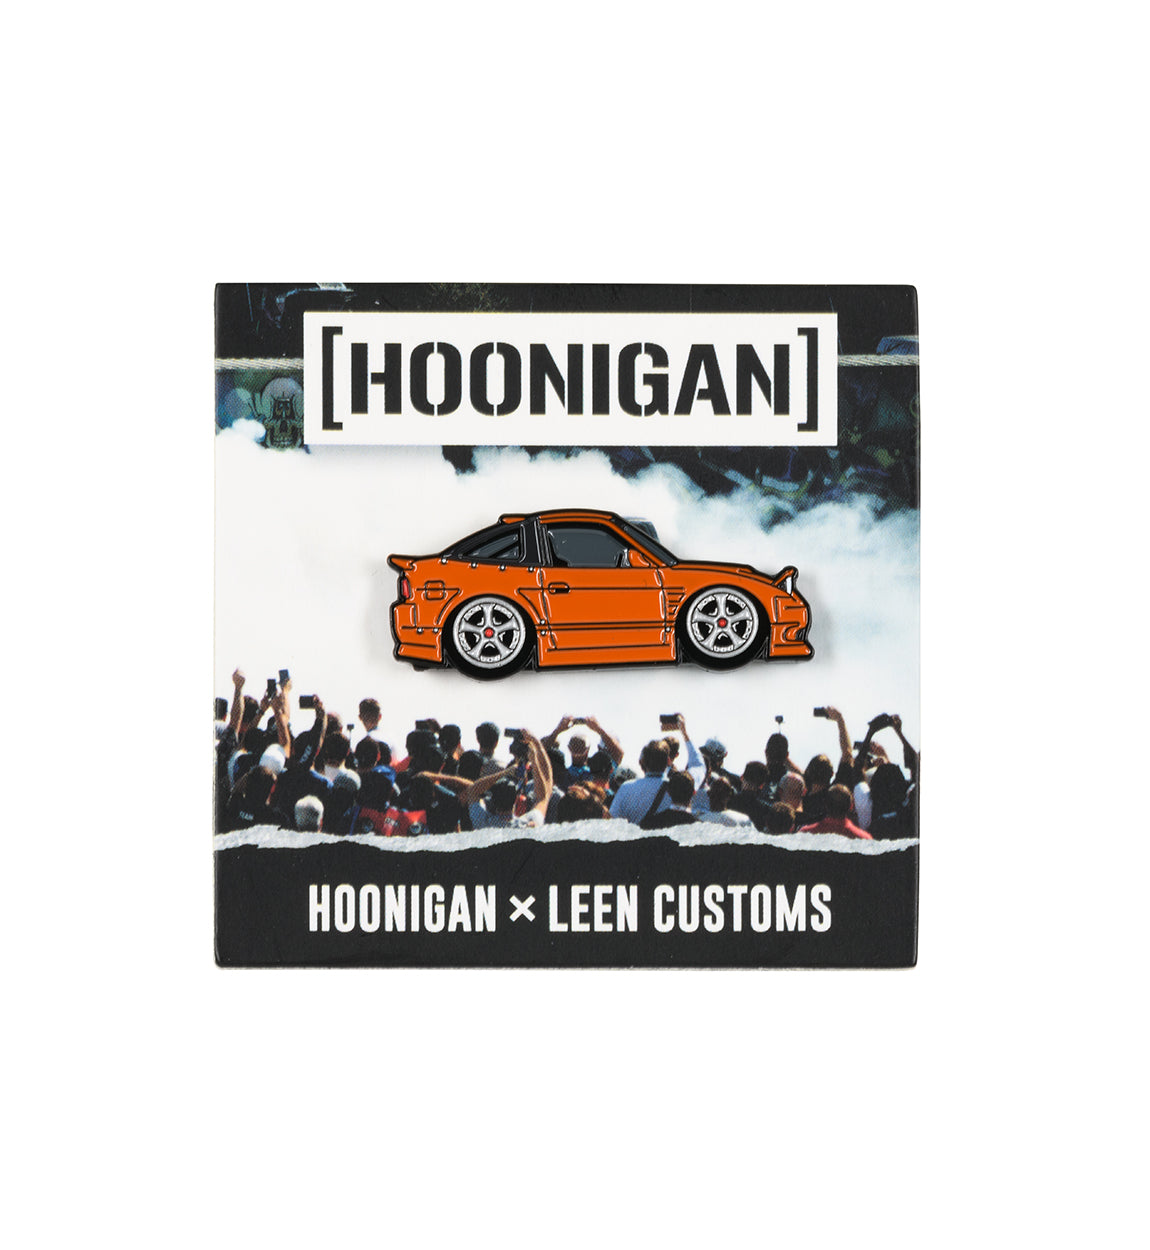 Hoonigan x Leen Customs Limited Hert Simple Seat Time Stallion 240 Collectible Pin